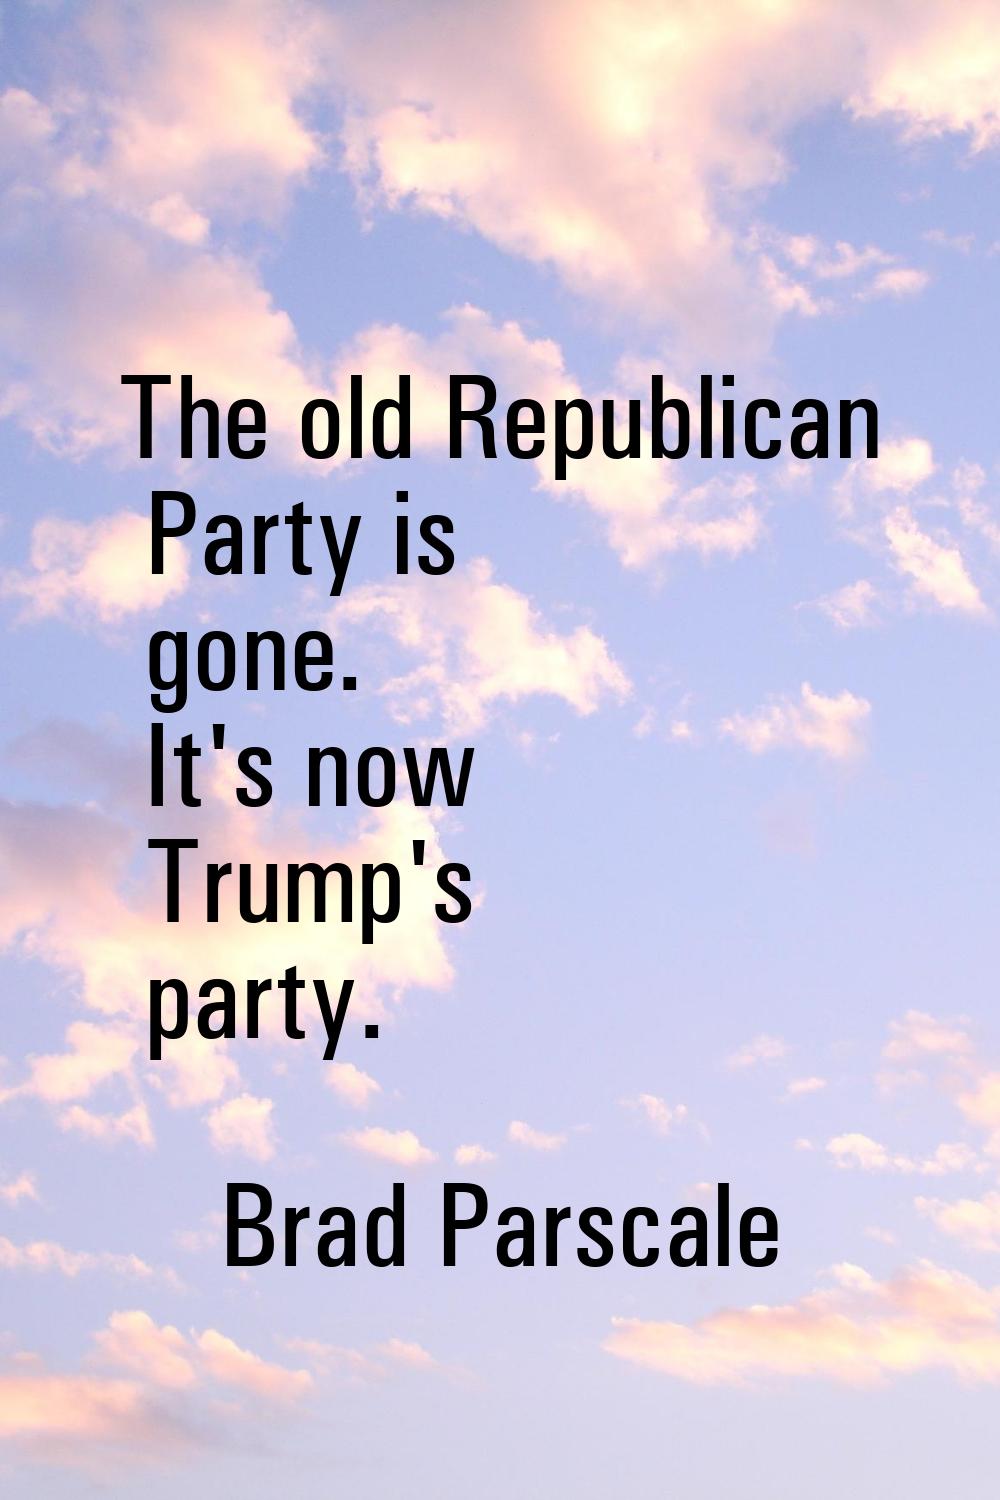 The old Republican Party is gone. It's now Trump's party.